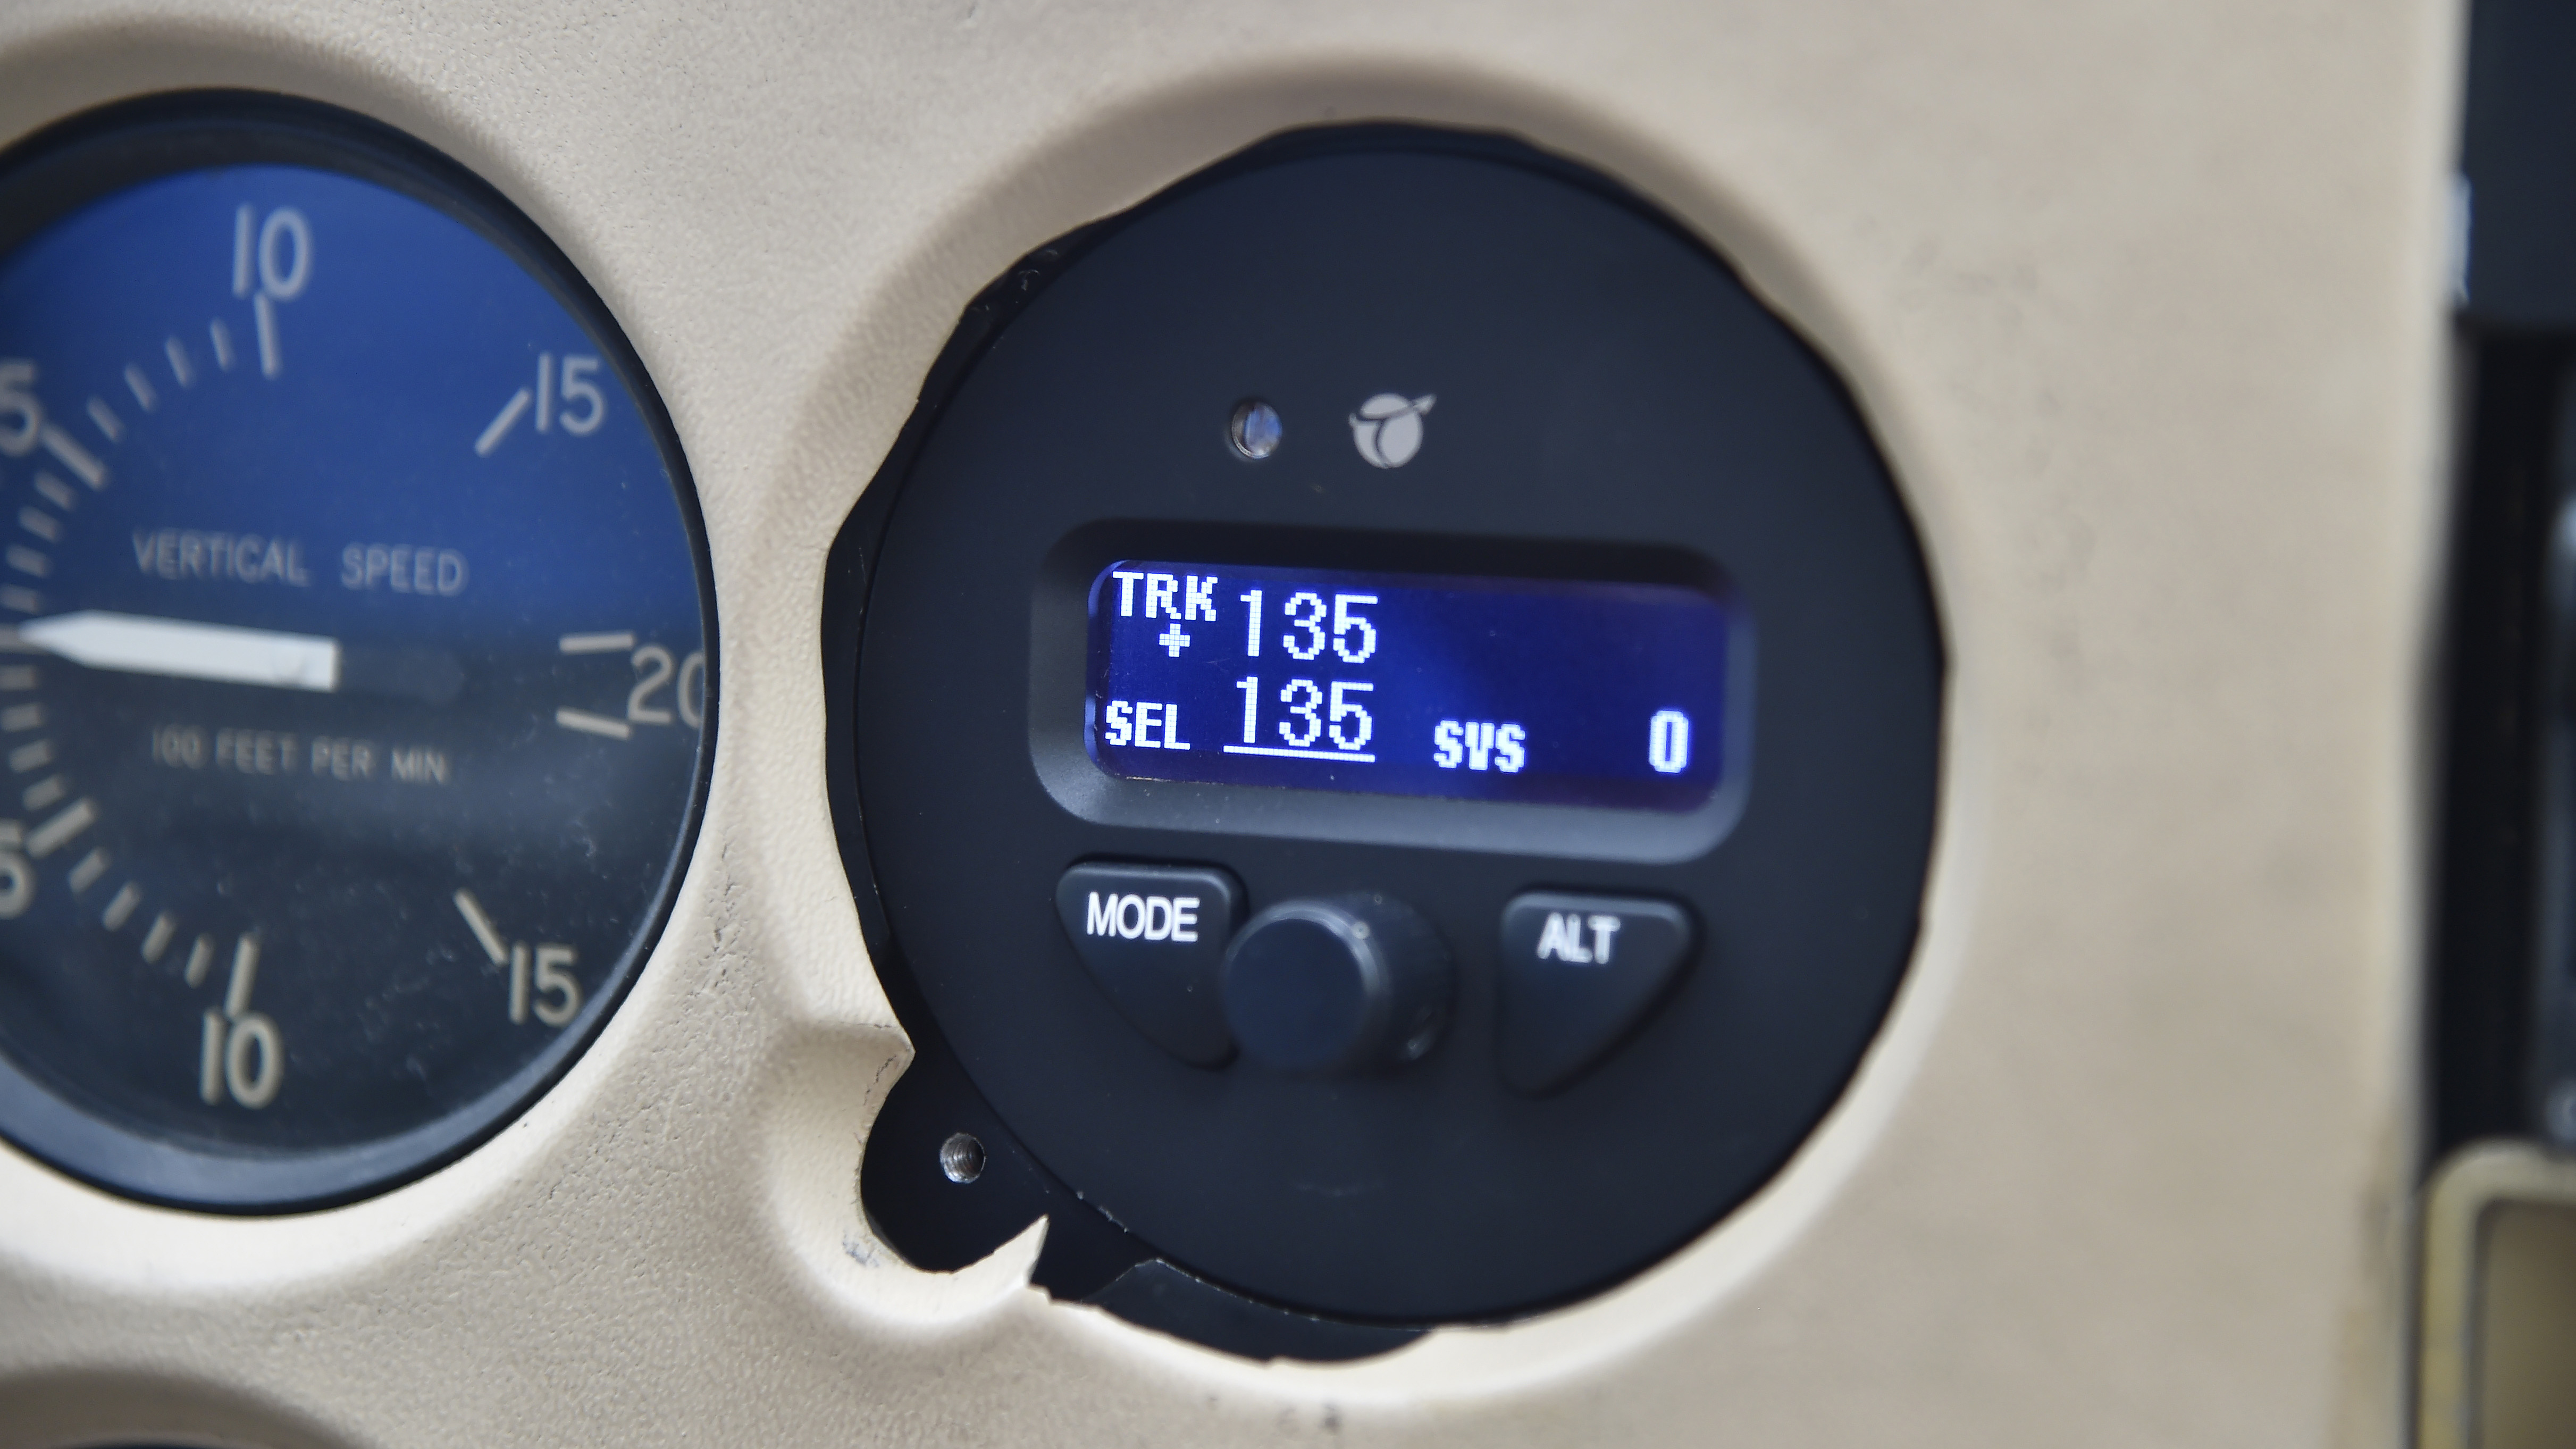 The Tru Trak Vizion autopilot seen in this photo installed on a Cessna 172, contains an emergency button that automatically stabilizes the aircraft. The autopilot also communicates with panel-mounted GPS units. Photo by David Tulis.